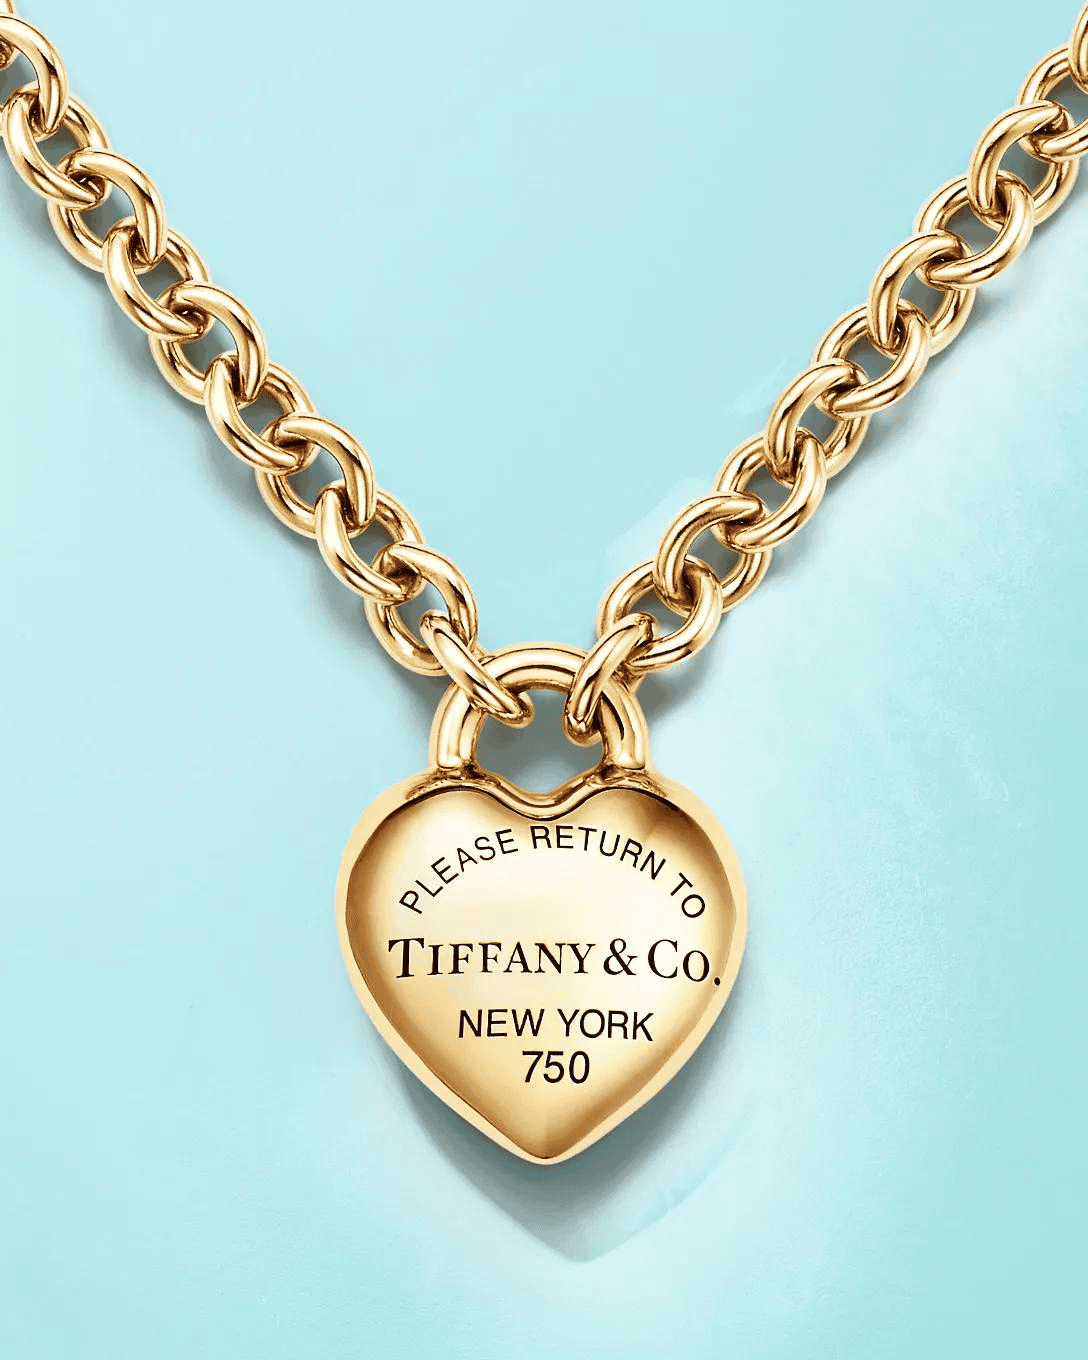 Collections | Tiffany & Co.